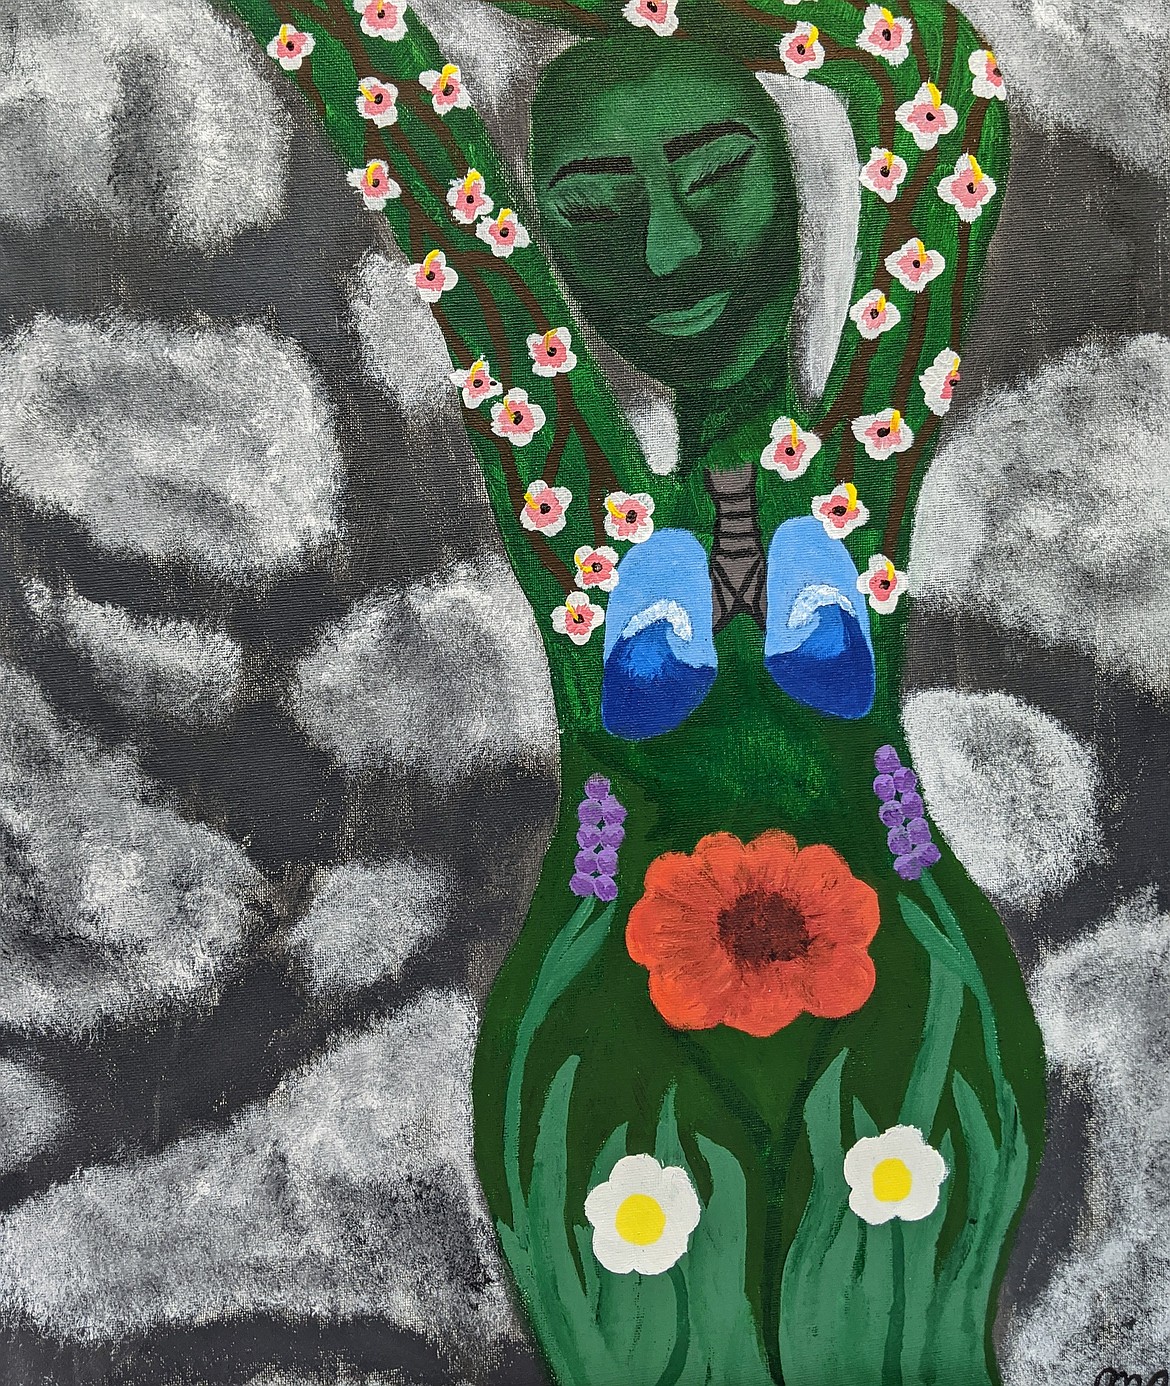 Mycah Atkins’ “Mother Earth” was also recognized as an honorable mention in this year’s art exhibition.